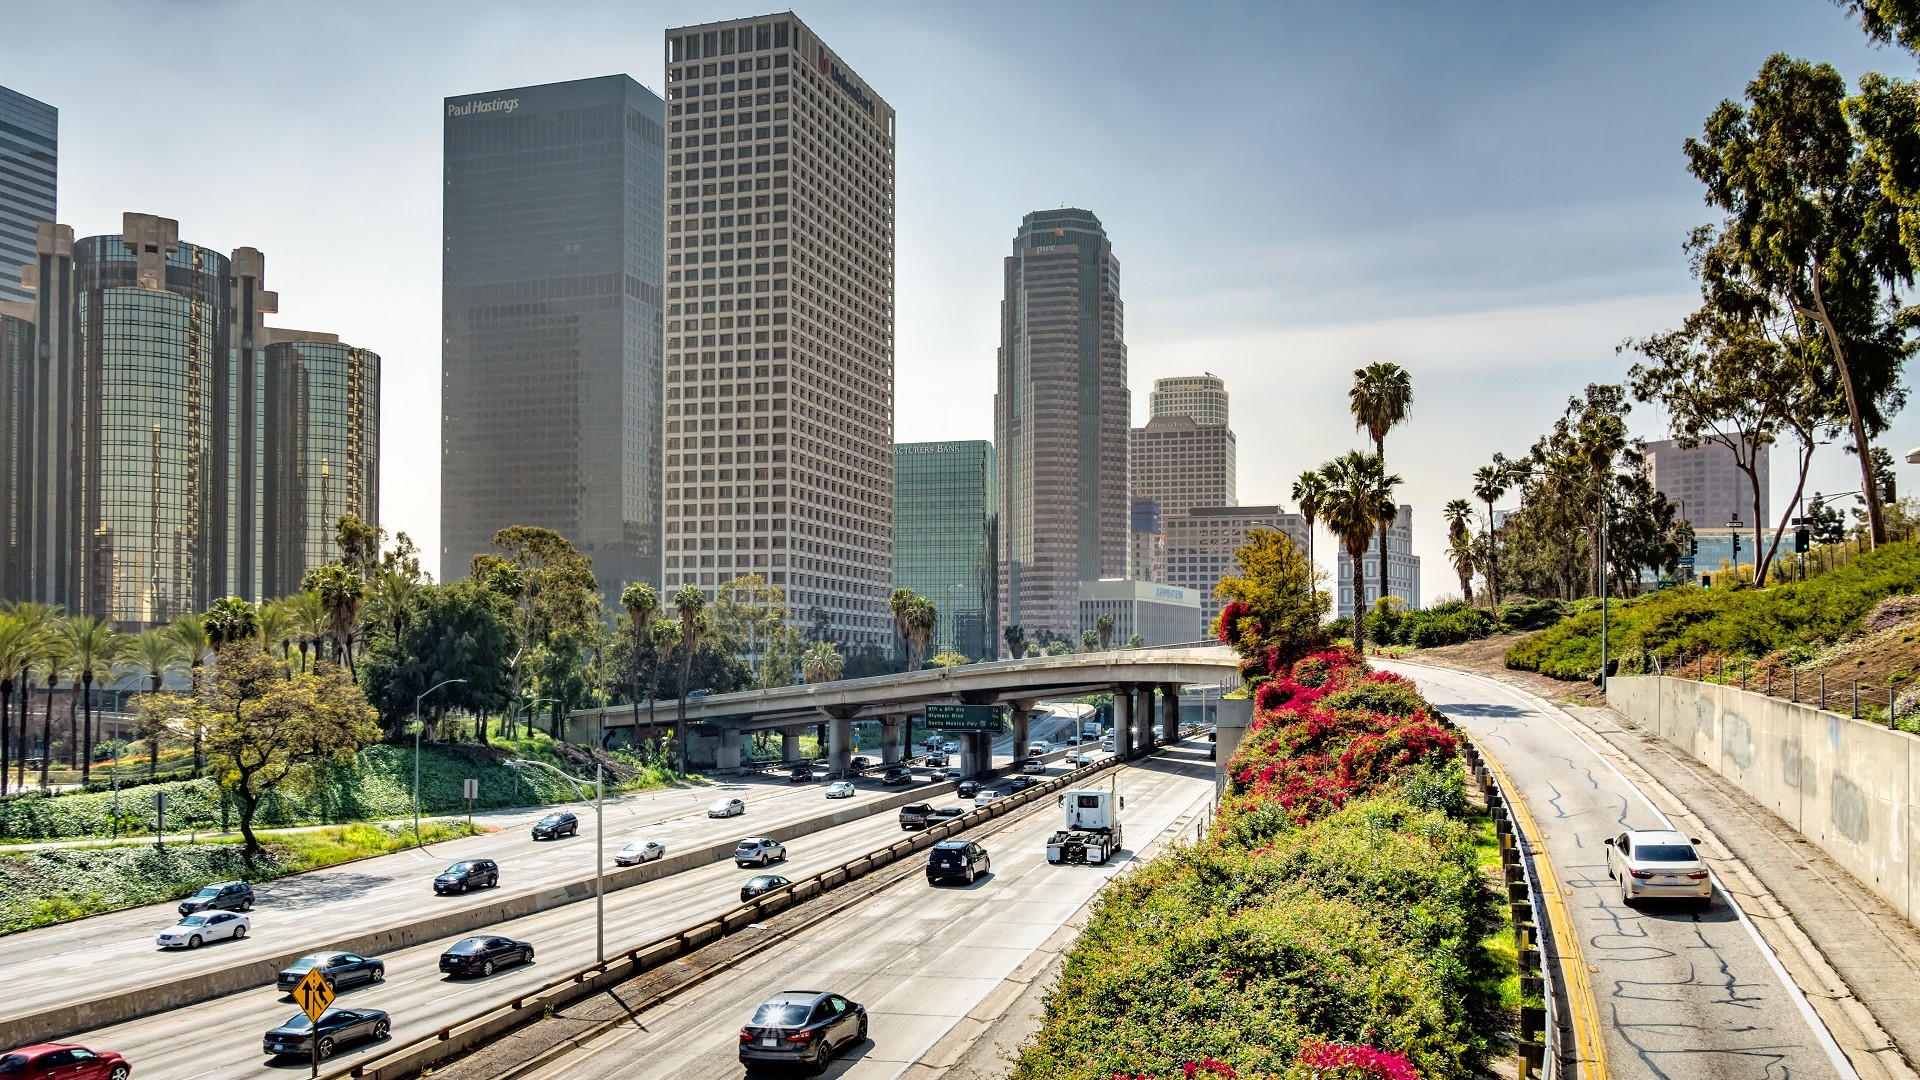 los angeles downtown 110 freeway traffic cars vehicles_iStock-1389974297